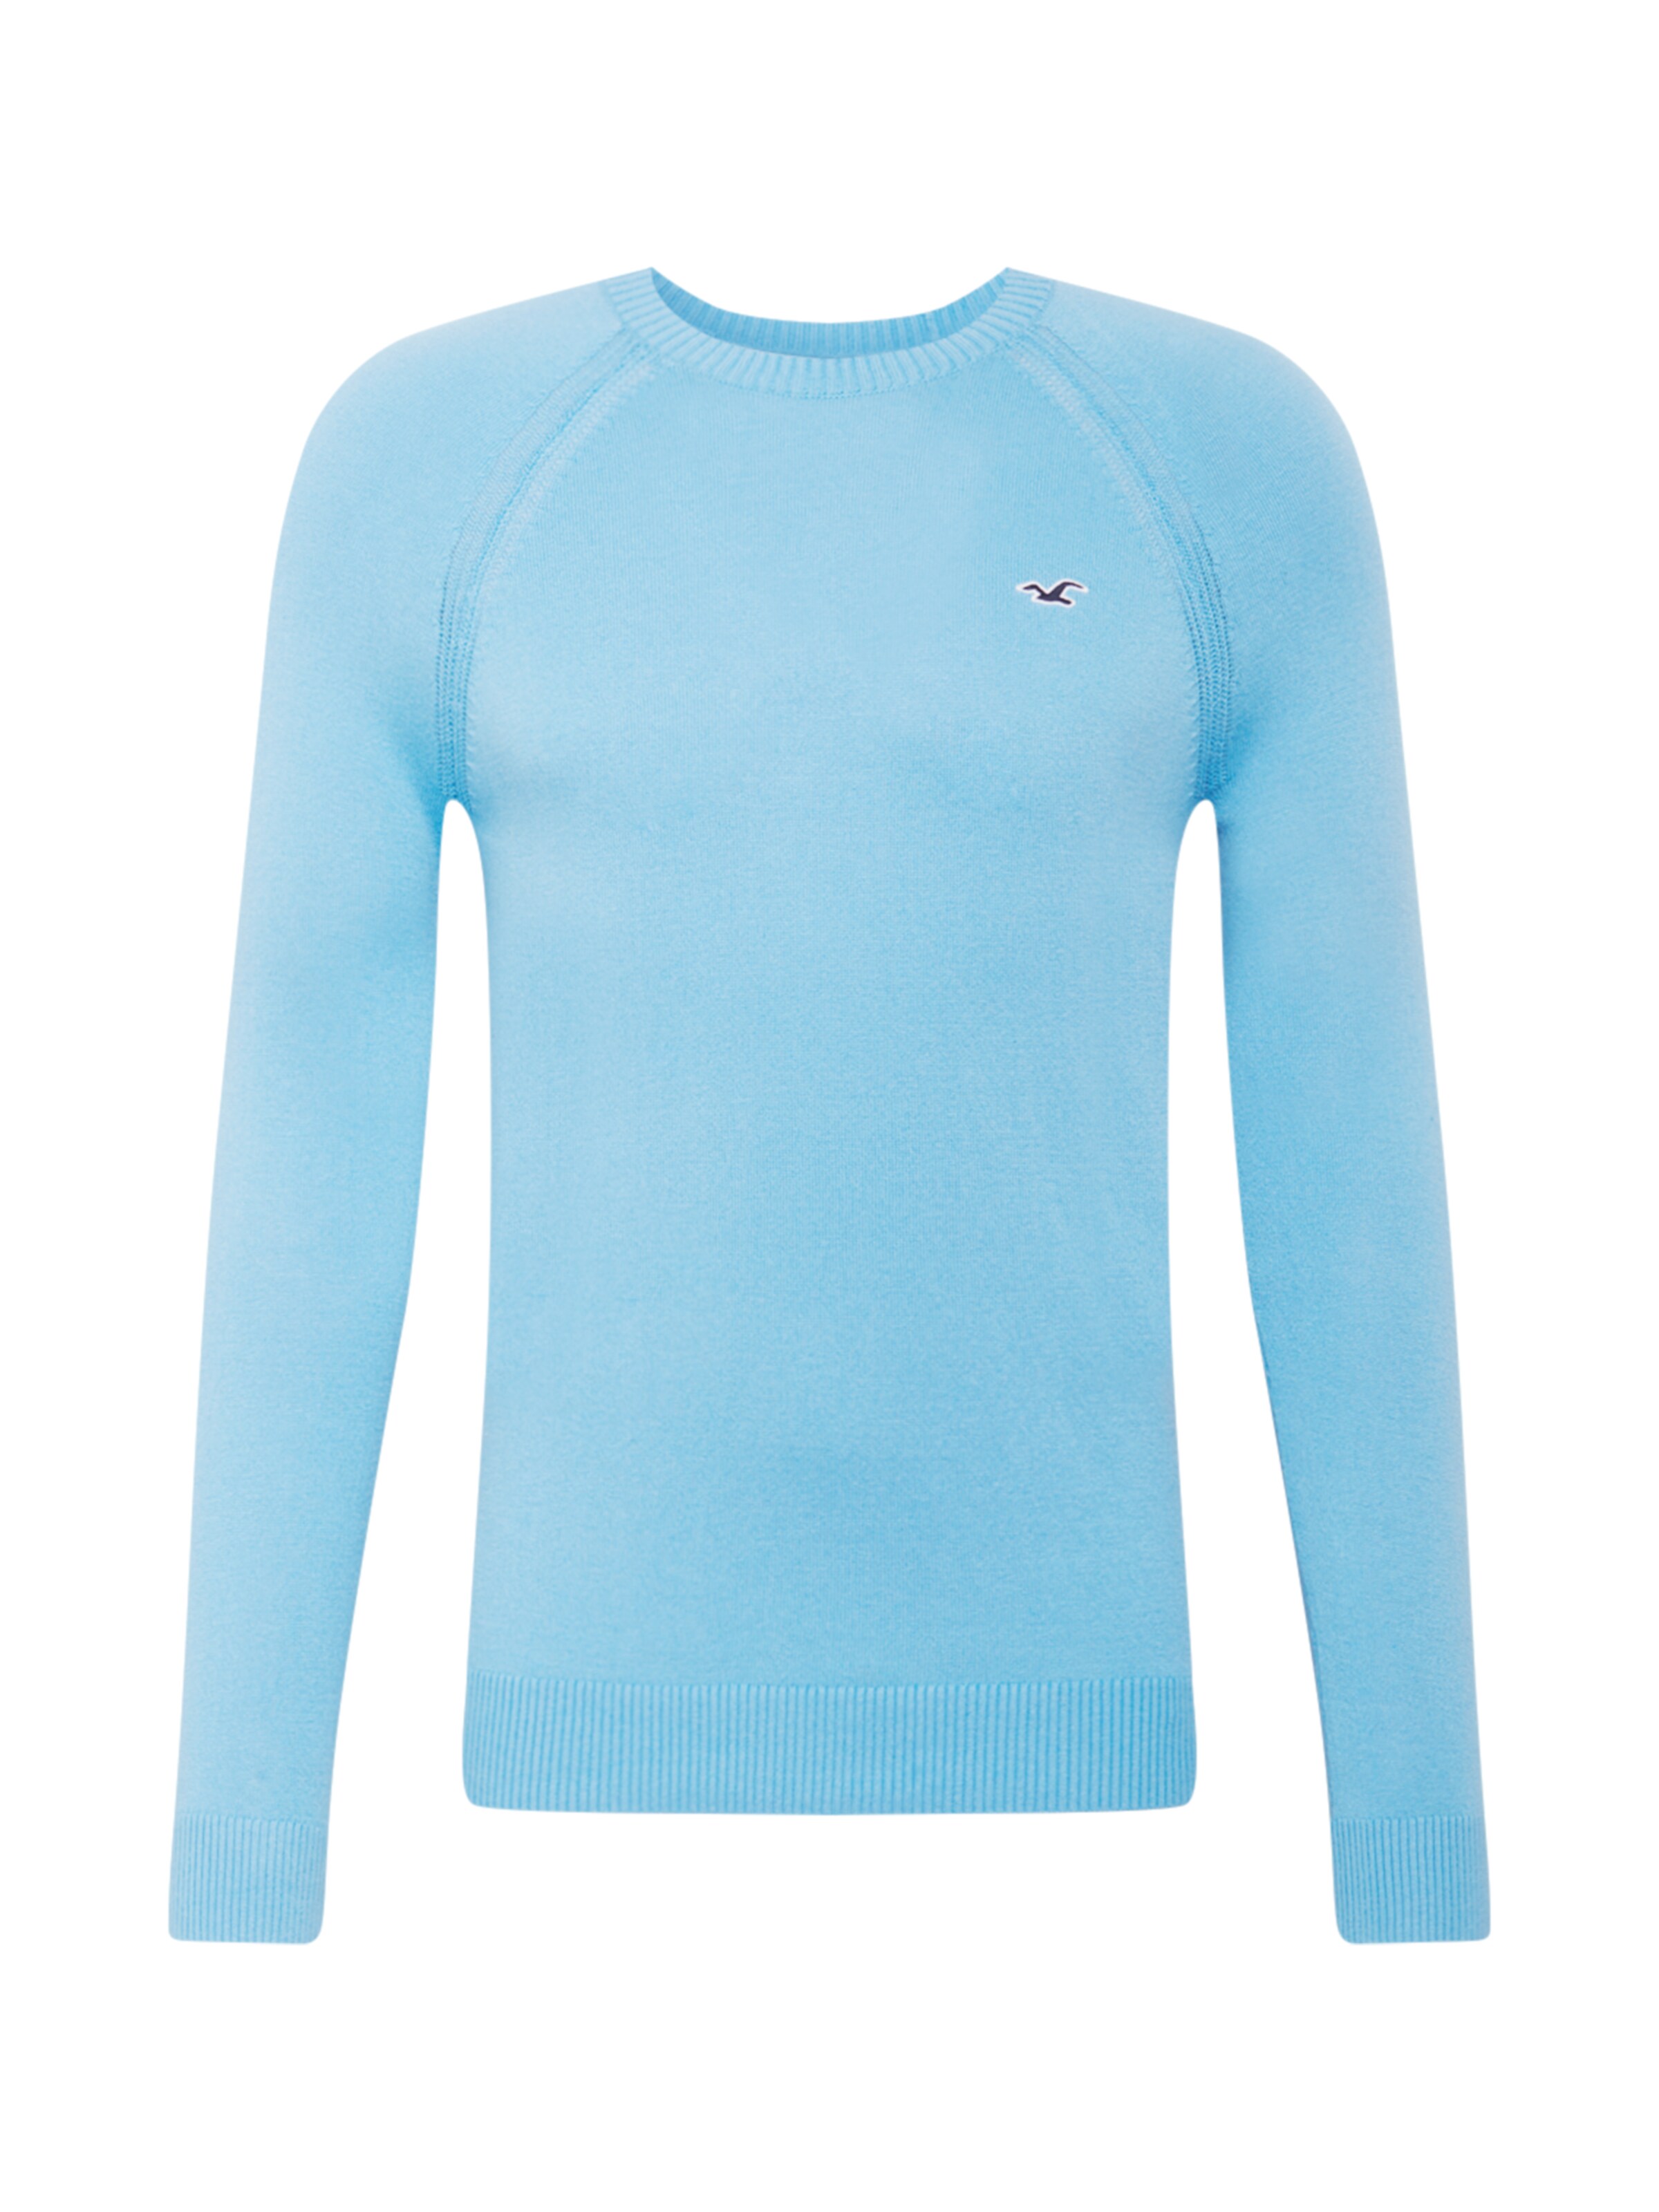 HOLLISTER Sweater in Light blue | ABOUT YOU